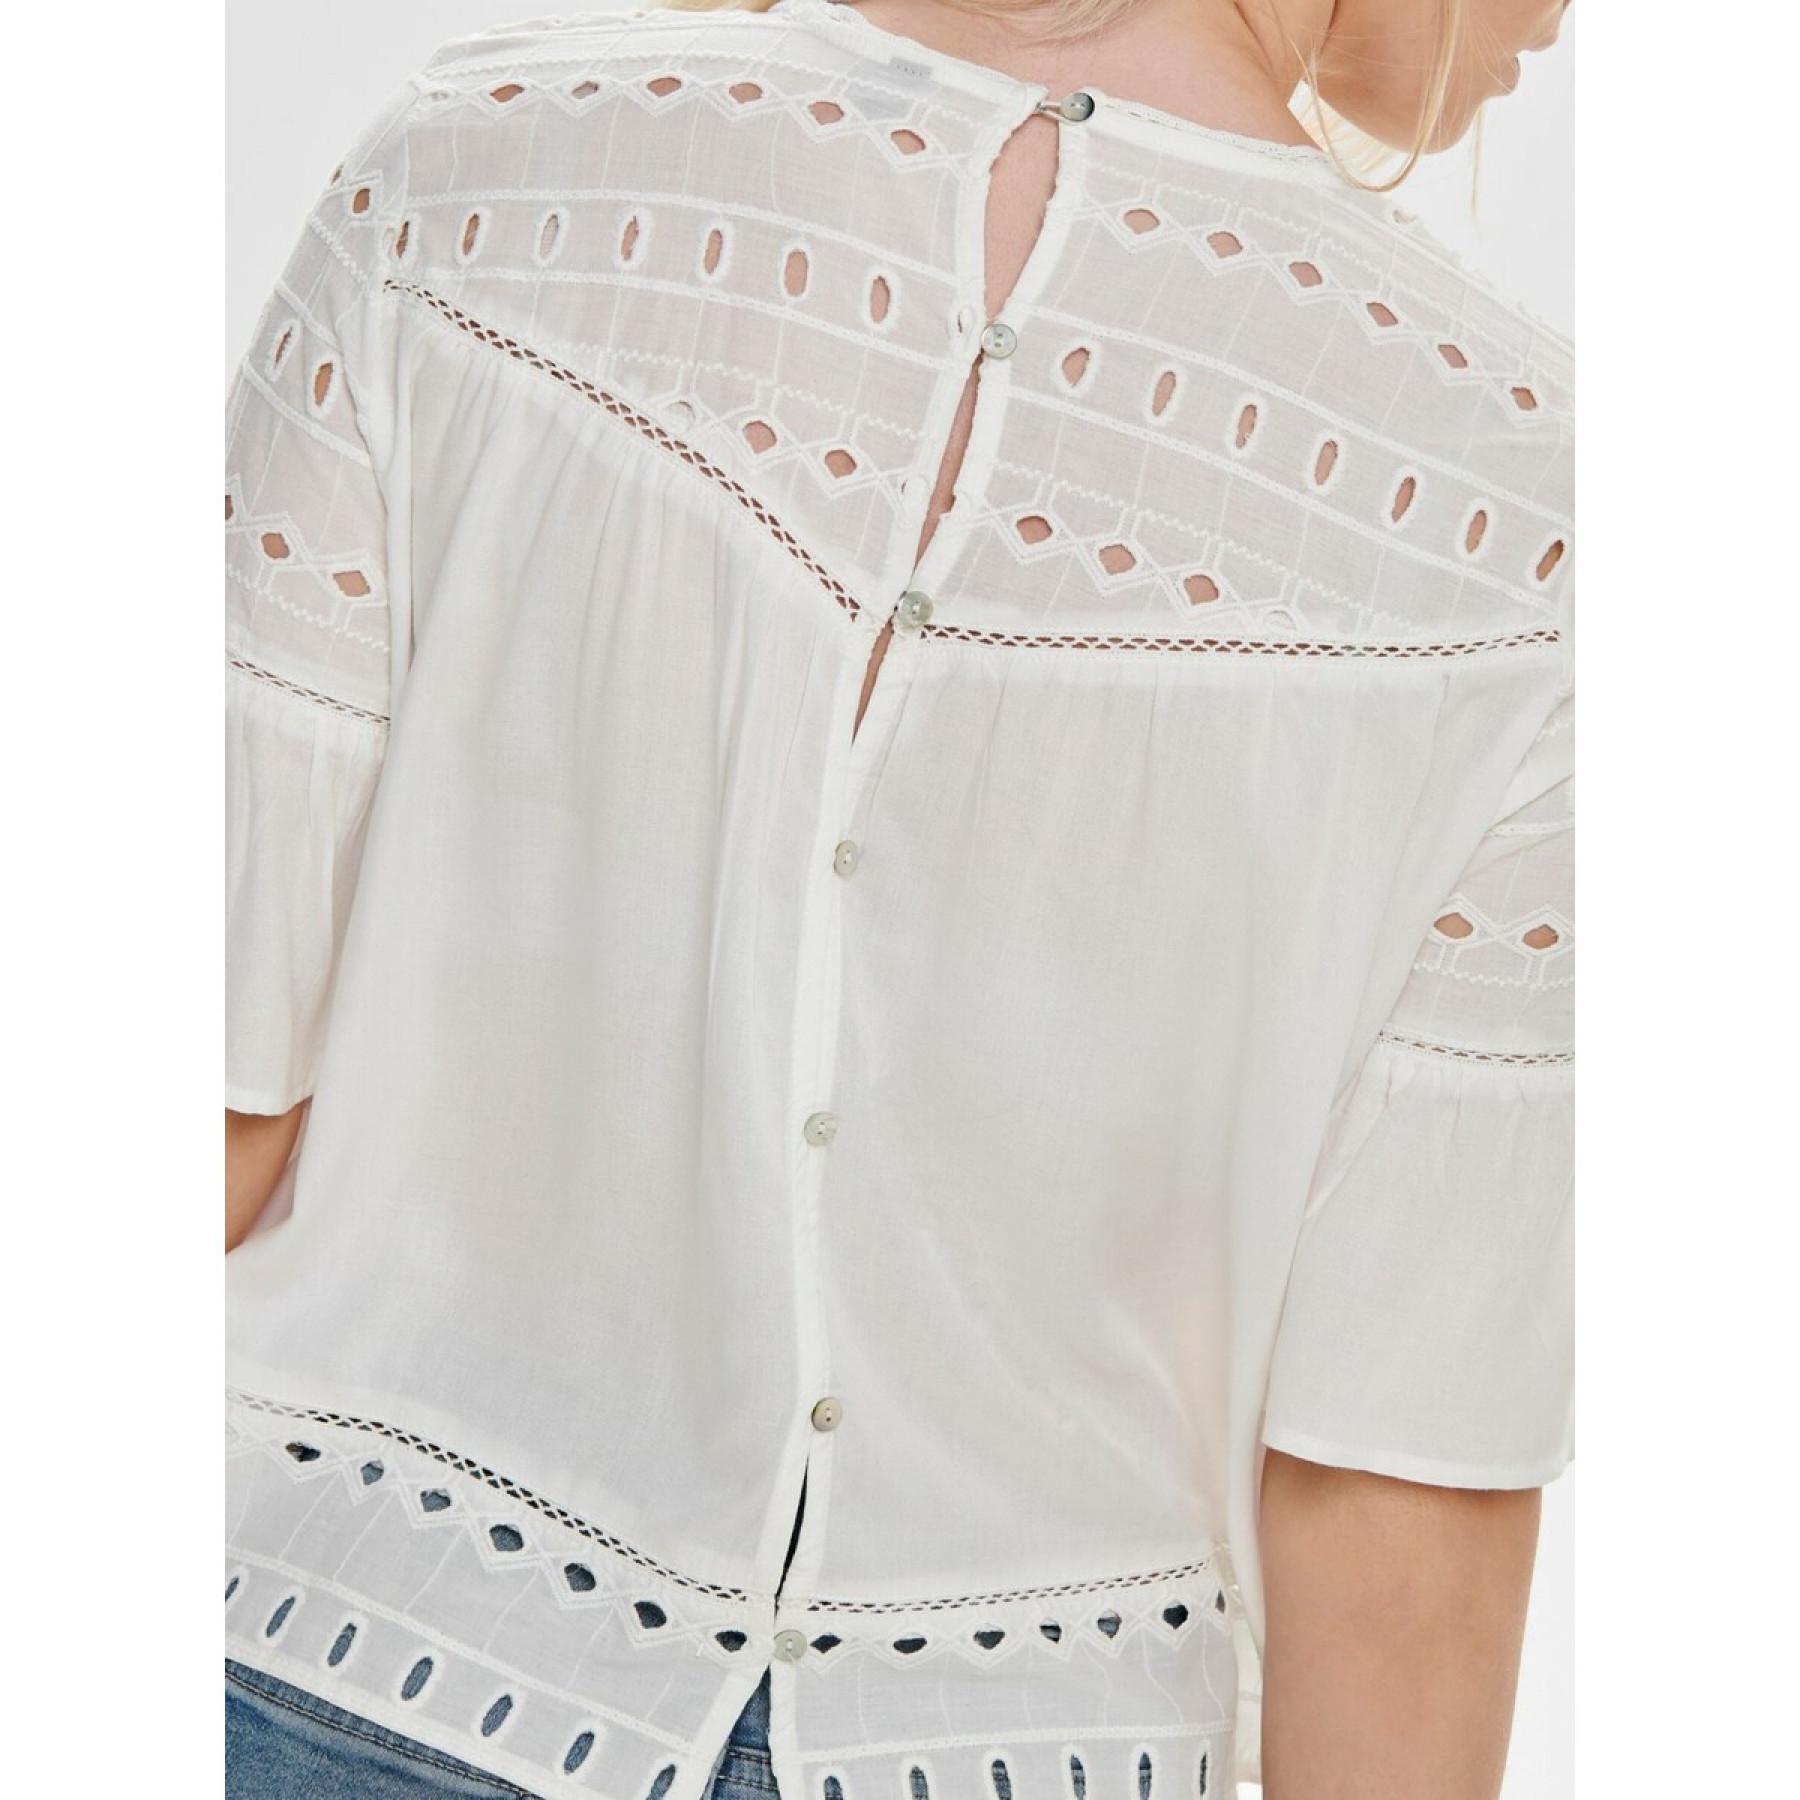 Vrouwen top Only Irina anglaise